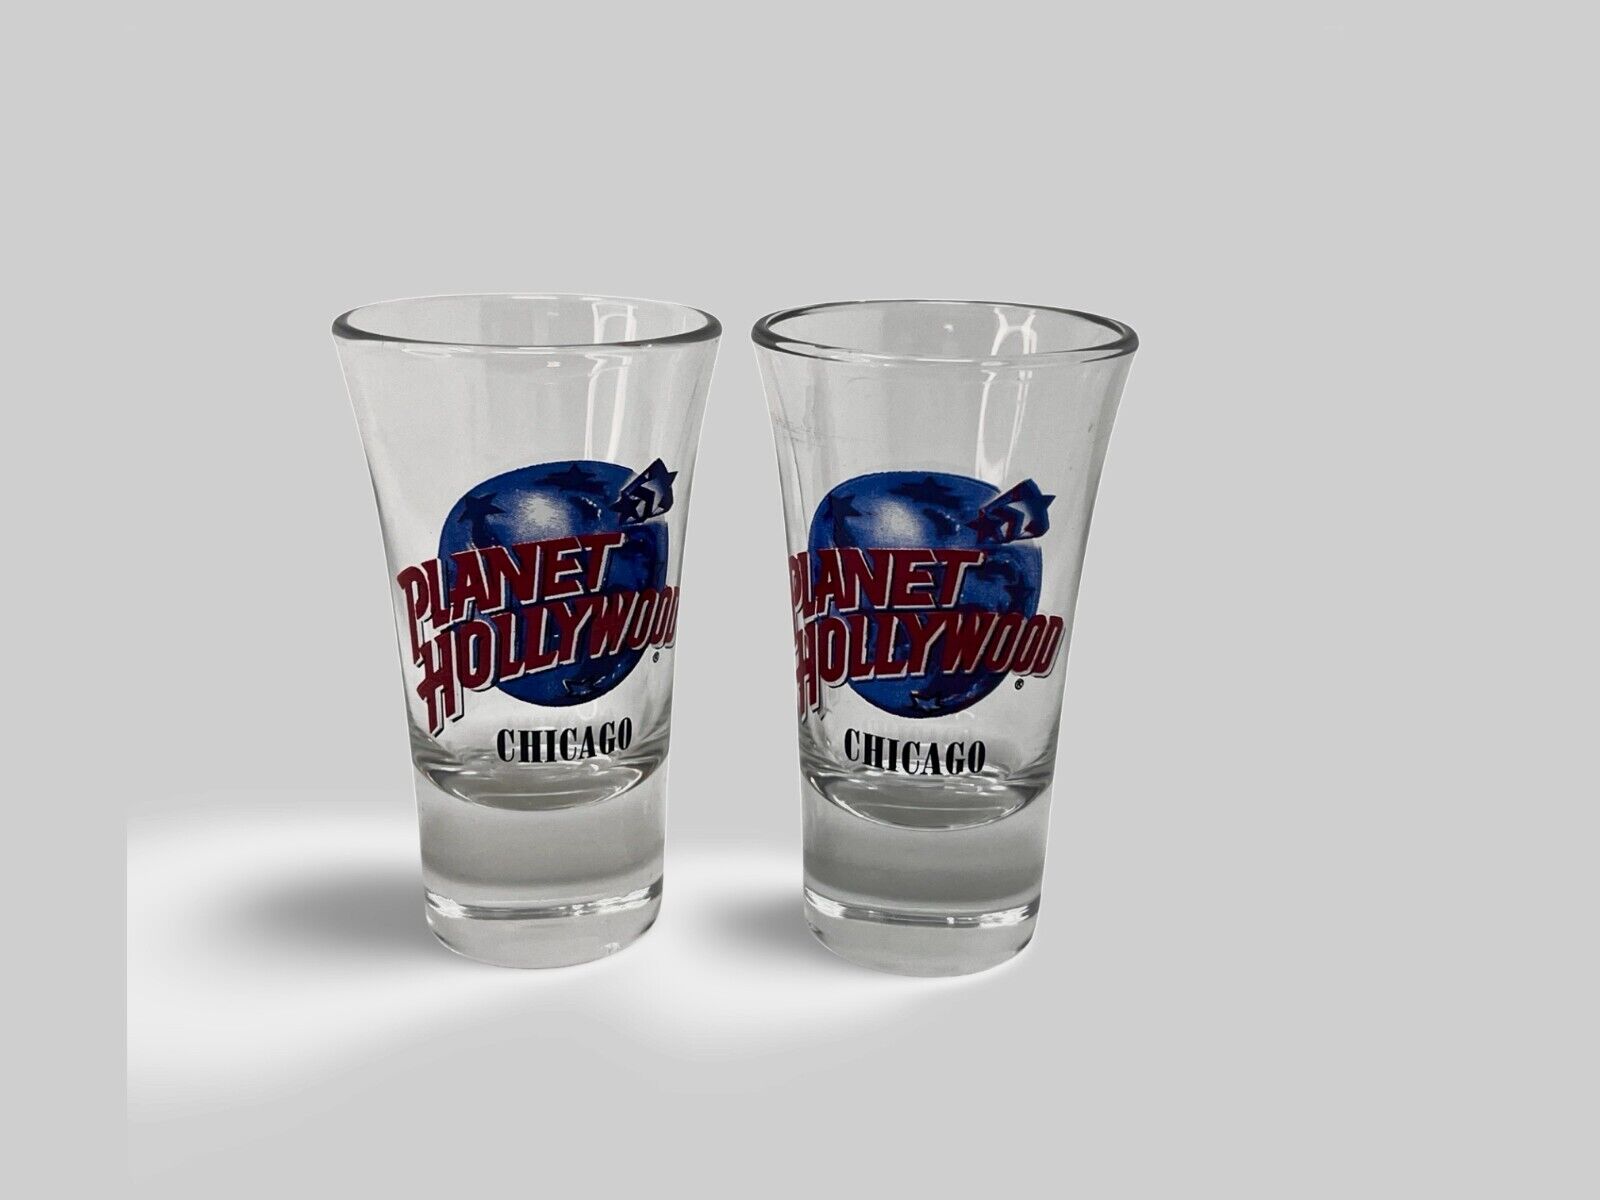 Lot of [2] Planet Hollywood Chicago Shot Glasses